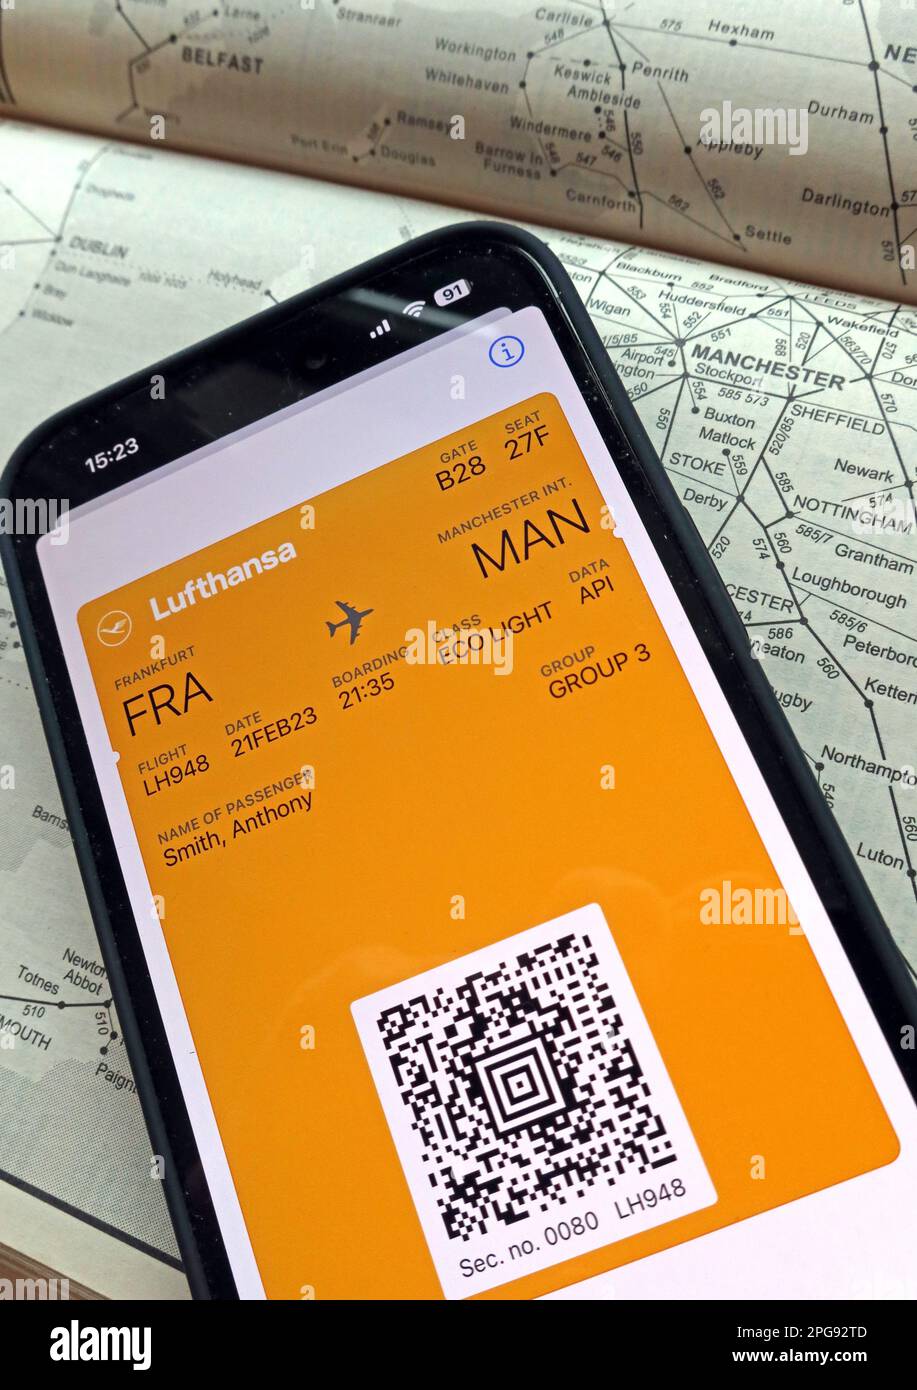 Airplane flight digital boarding pass FRA-MAN on mobile phone, with Lufthansa, and rail transport map of Manchester, North West England Stock Photo